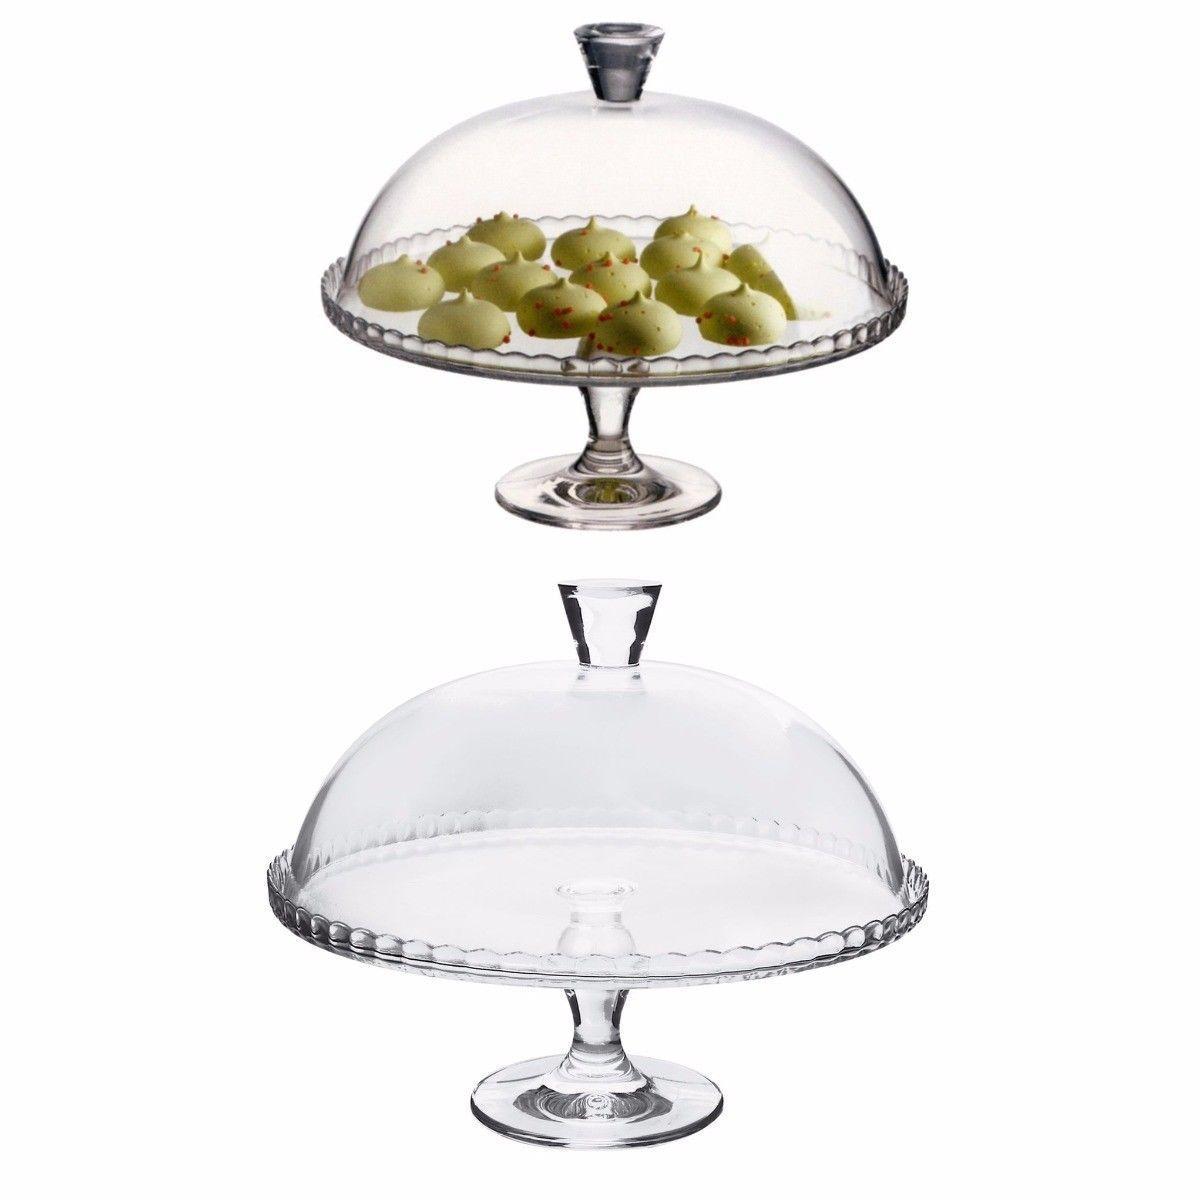 PB Footed Cake Dessert Table High Quality Glass Service Plate And Dome 33cm 95200 (Parcel Rate)